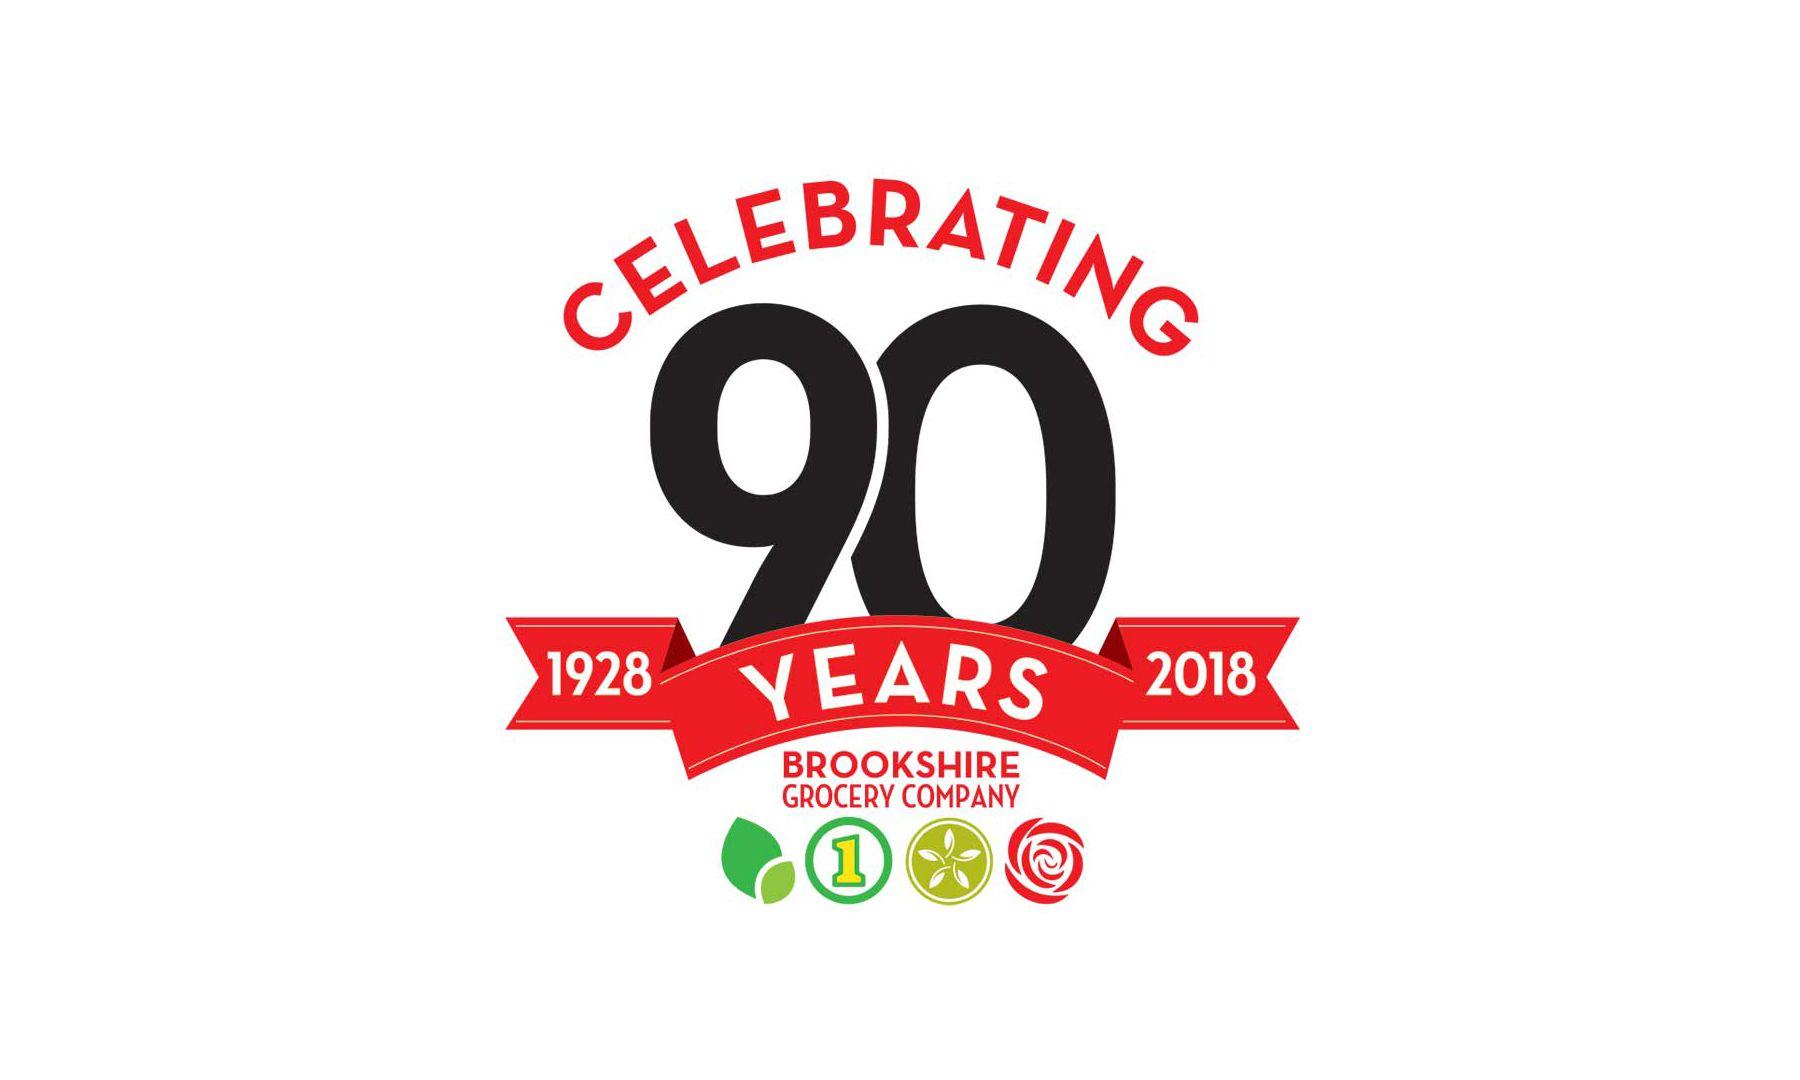 Brookshire Logo - Brookshire Grocery Co. Celebrates 90 Years In Business